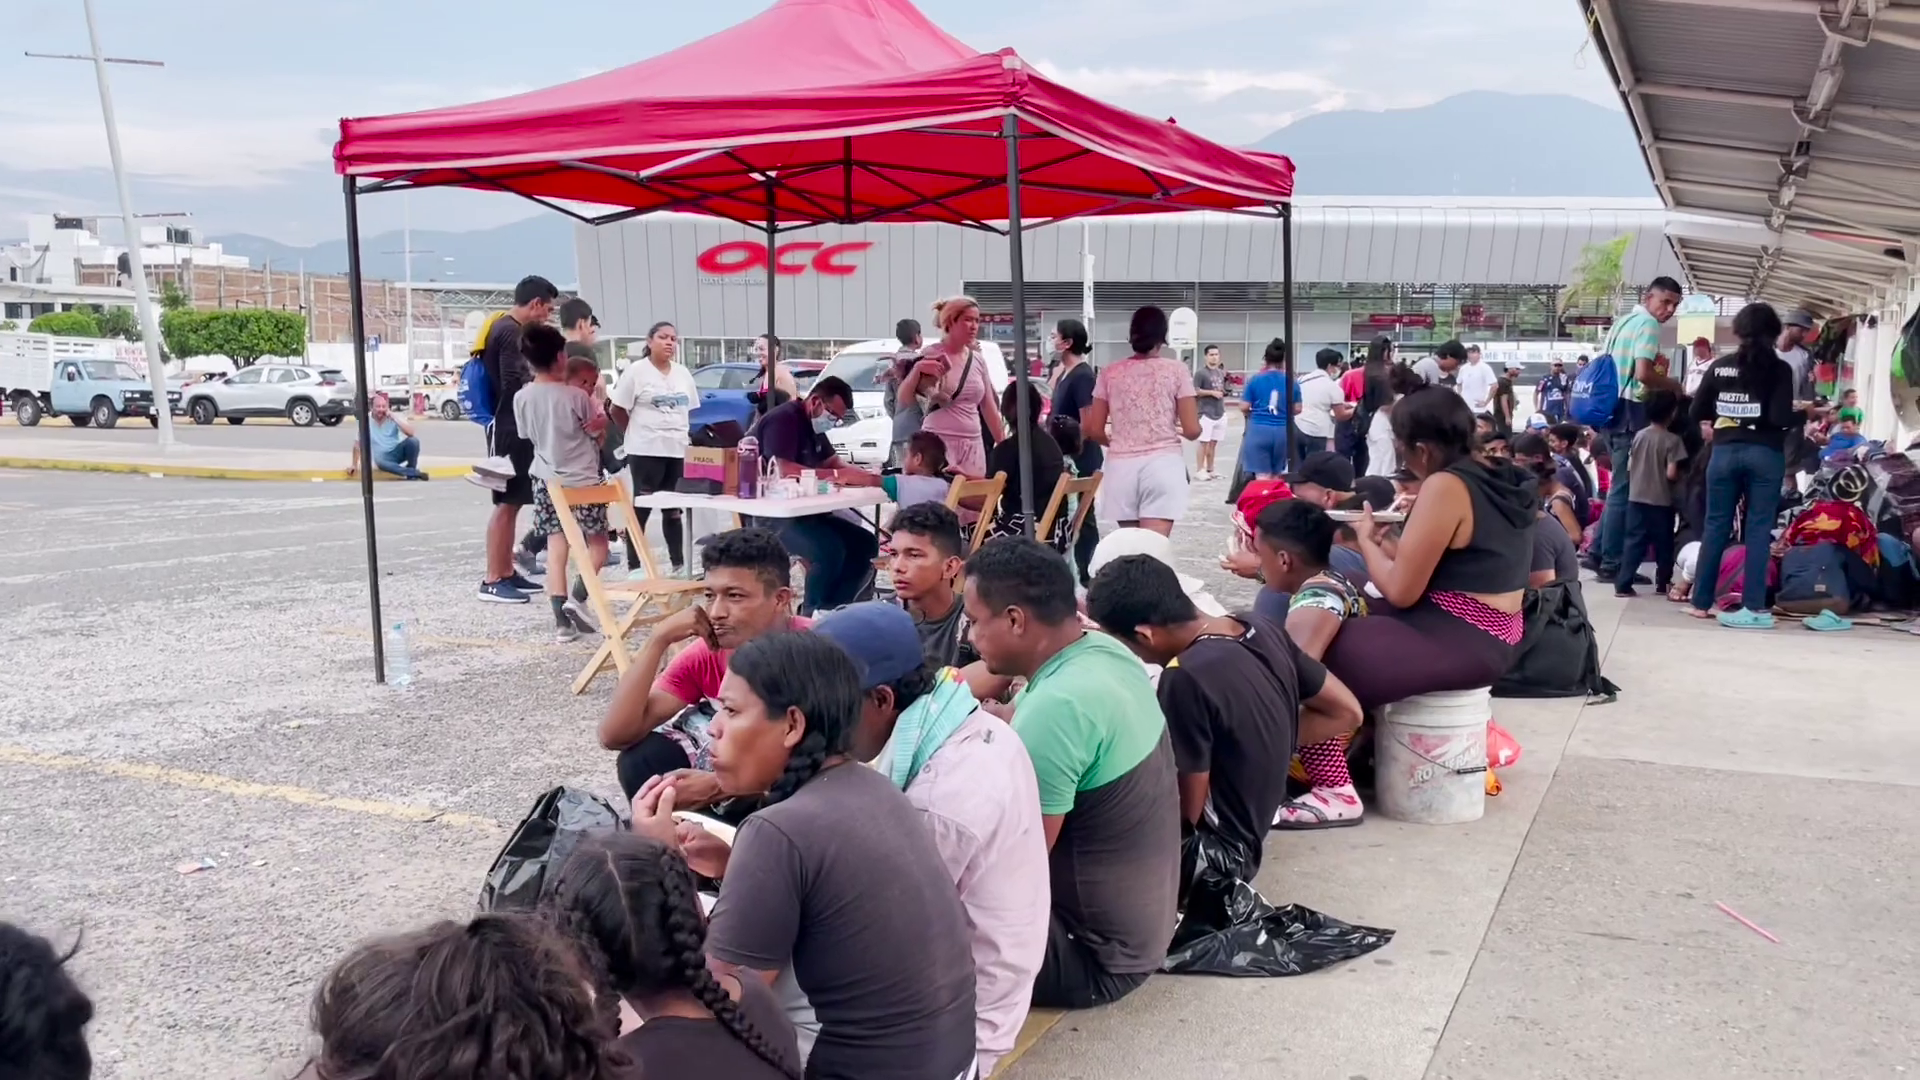 In the state of Chiapas, Mexico, an entire family organized a humanitarian aid campaign for immigrants from Central America and Venezuela.